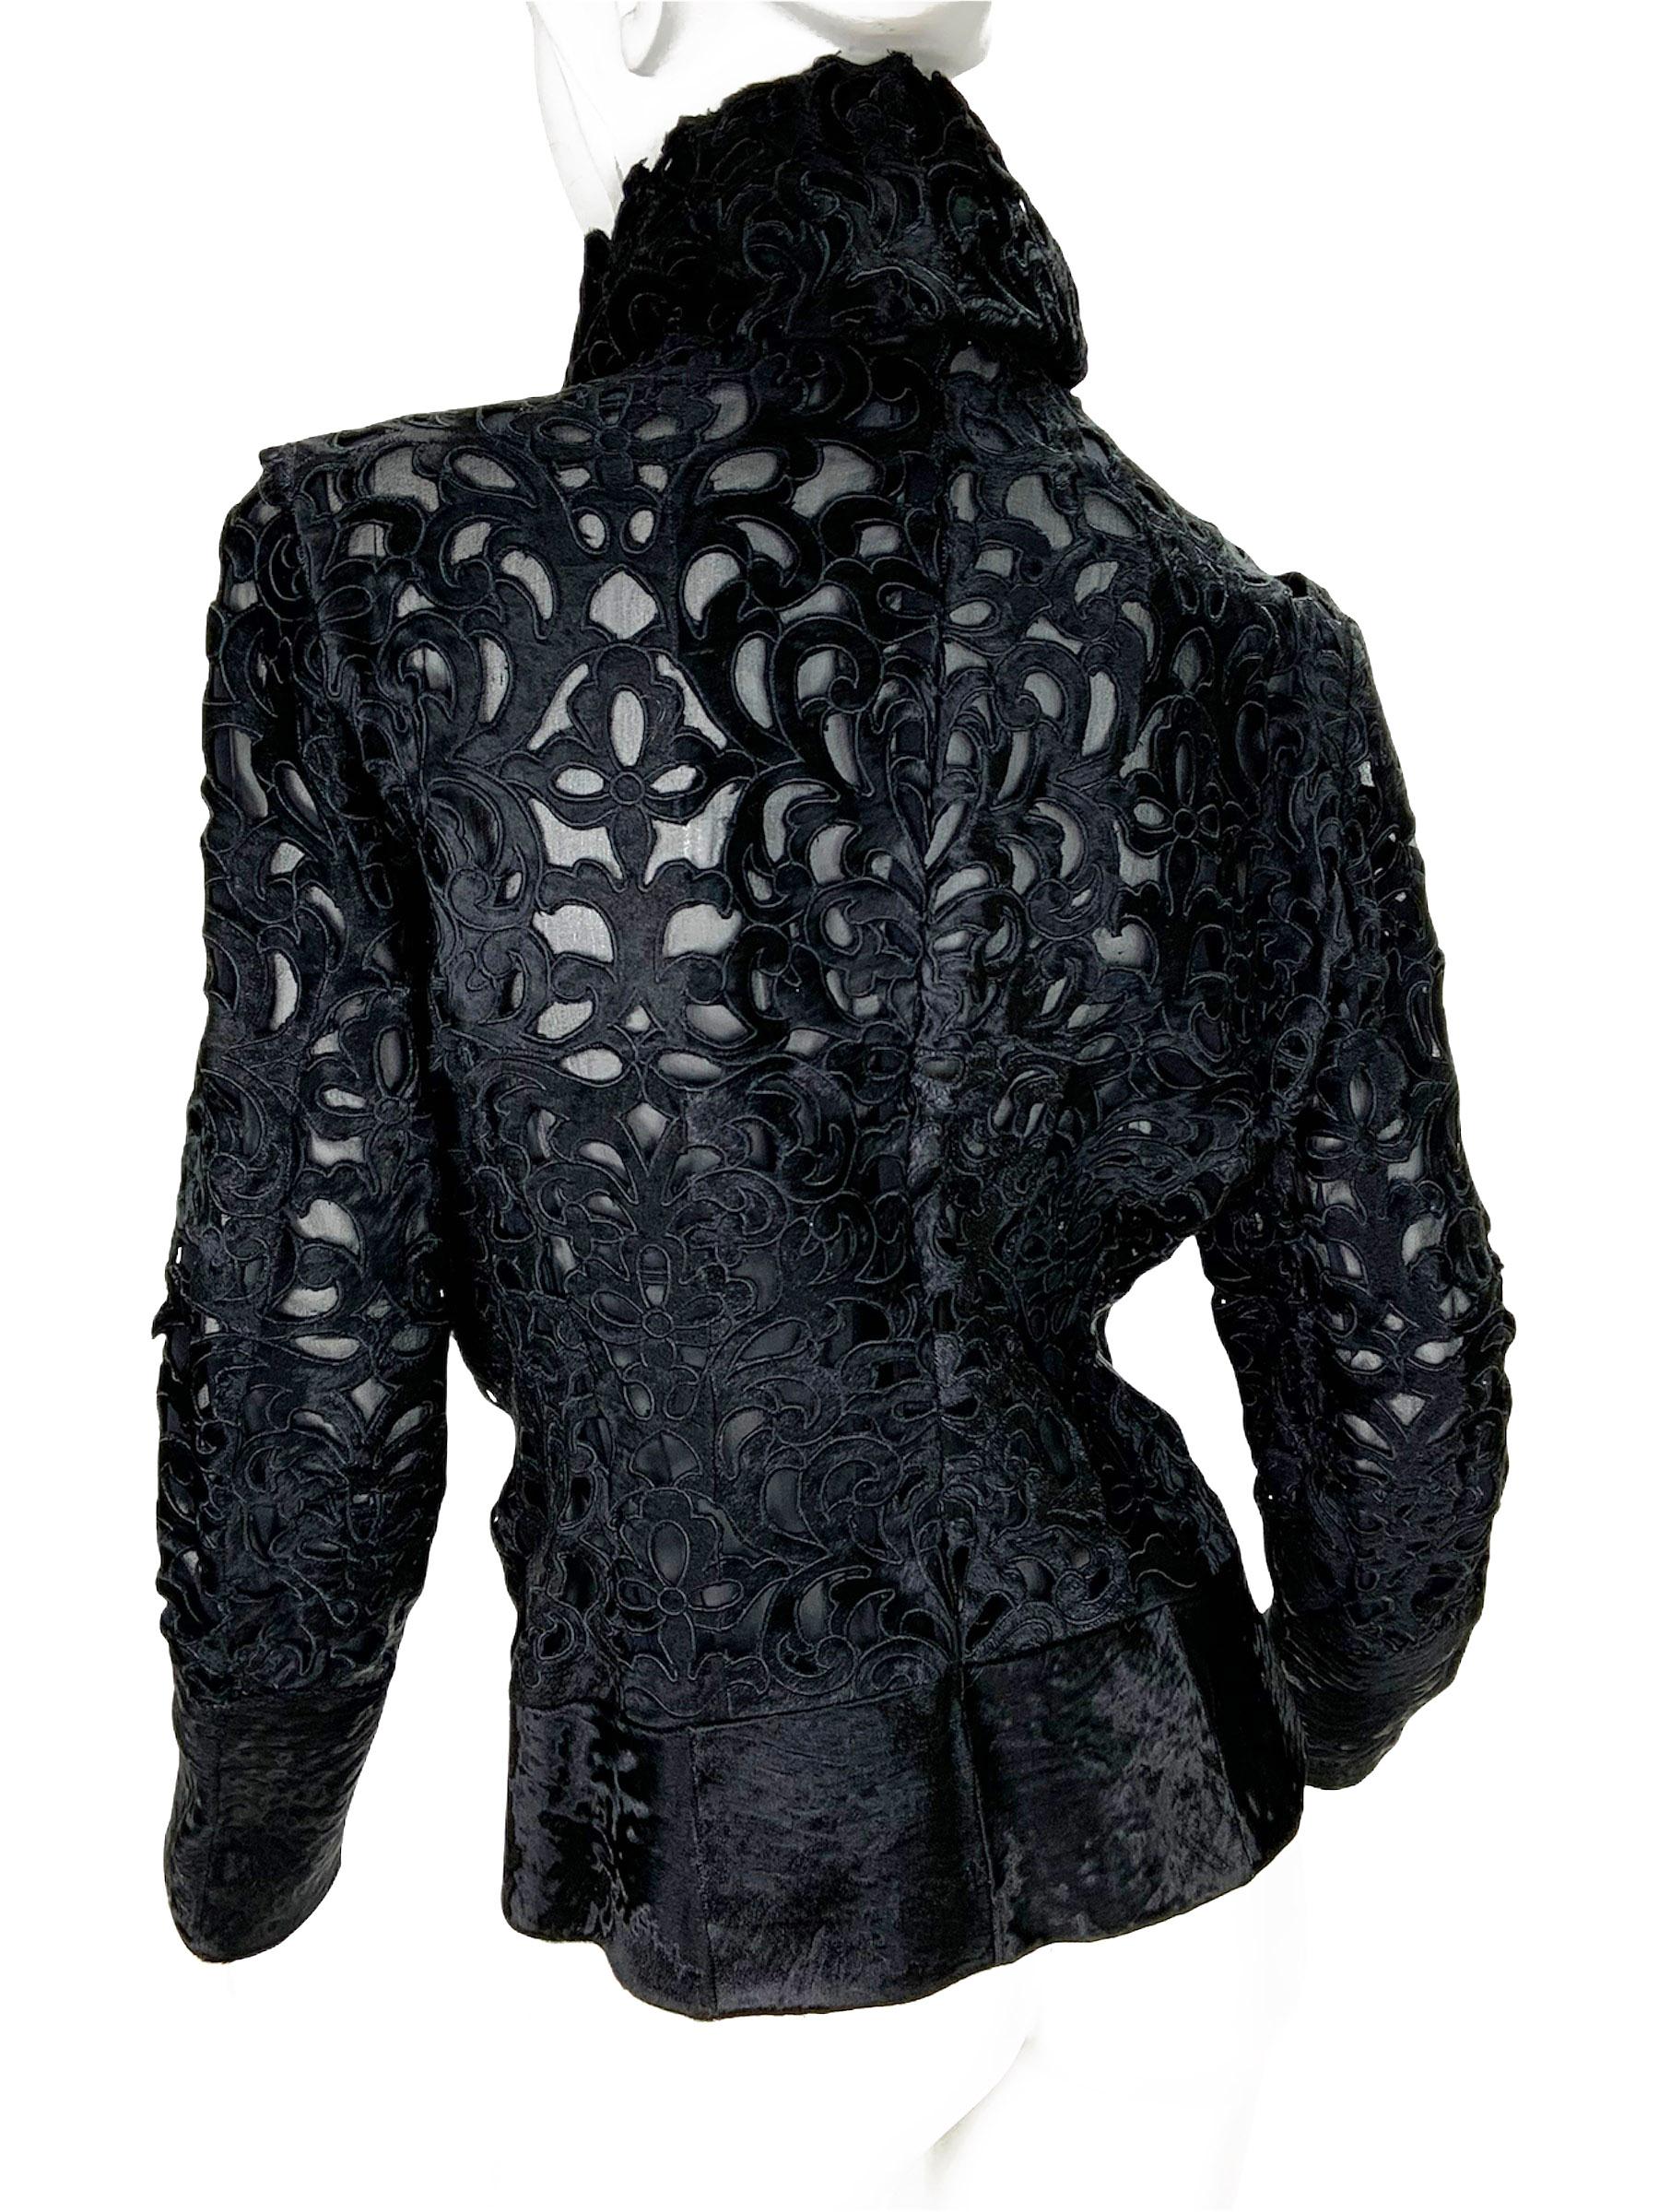 Women's New Tom Ford for Gucci 2004 Collection Black Lamb Fur Laser Cut Jacket 42 - US 6 For Sale